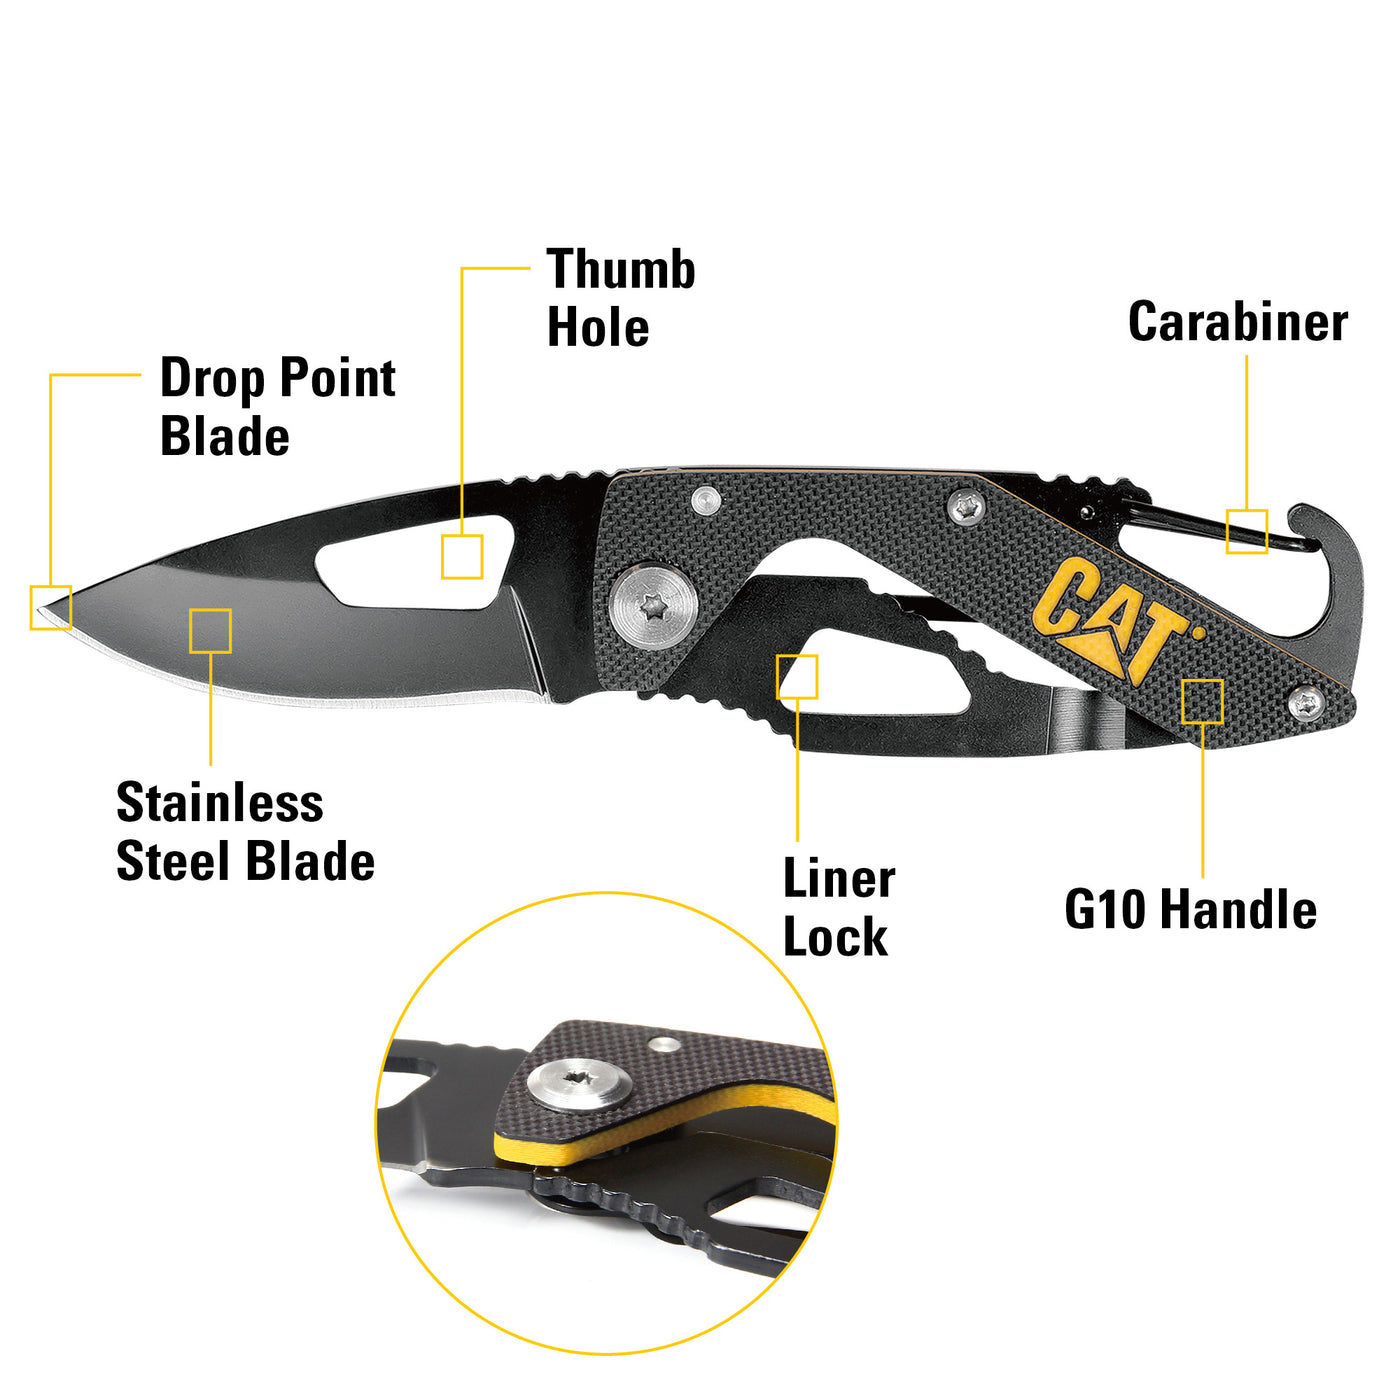 5-1/4 in. Folding Skeleton Knife with Carabiner and Black Blade